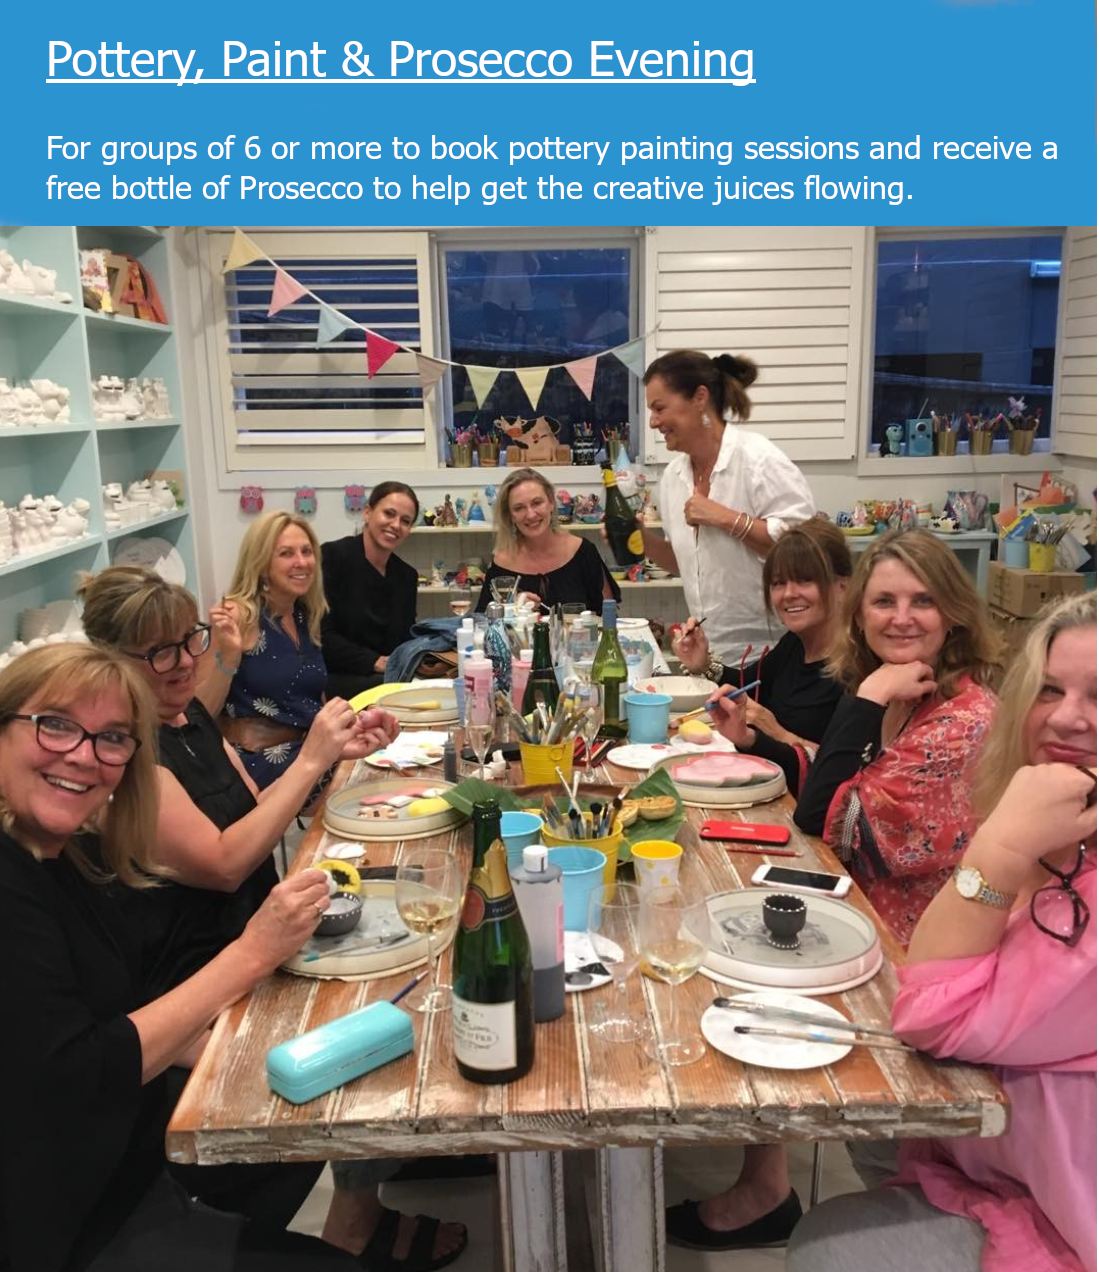 Pottery, Paint & Prosecco Evening ($5 per person deposit)